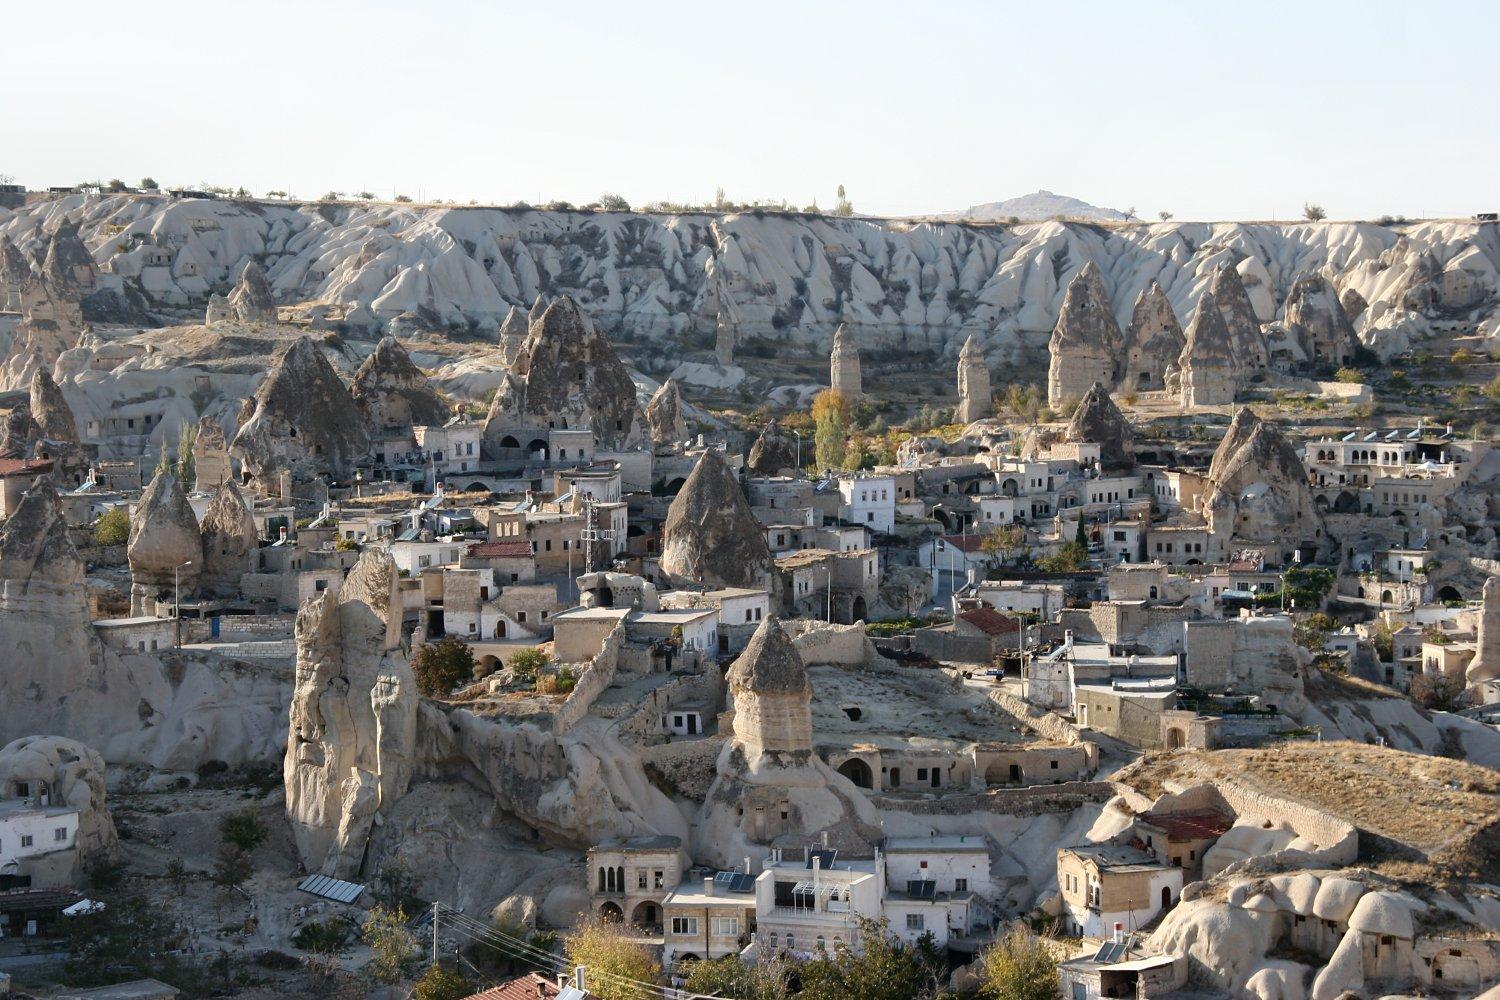 The Goreme Valley. Wikimedia Commons and Karsten Dorre.